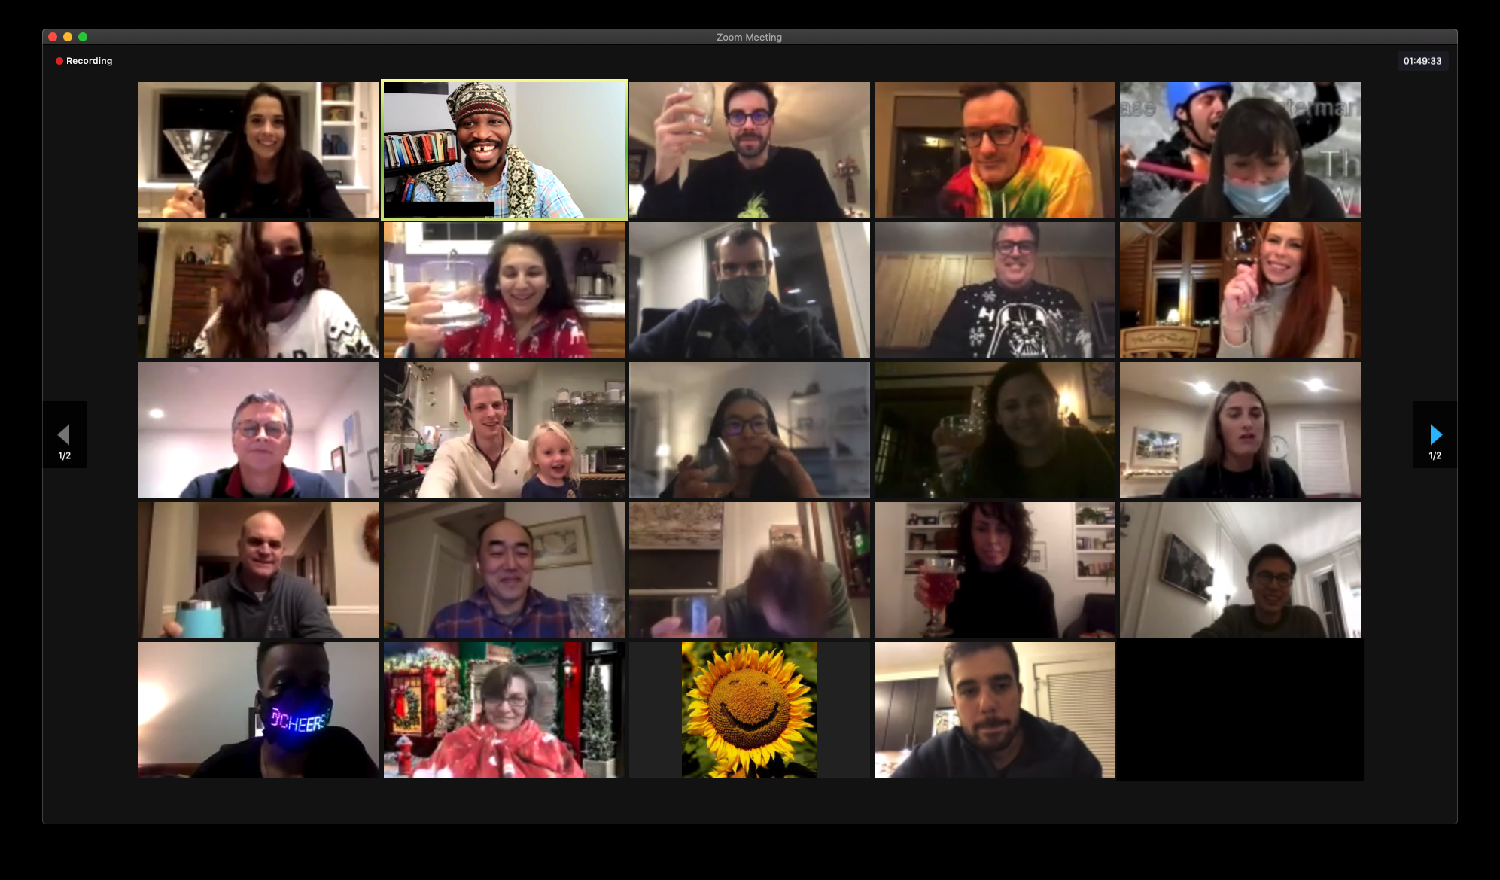 Sharing a cheers with our colleagues over Zoom for our 2020 Holiday Party (Ugly Sweater Edition)!